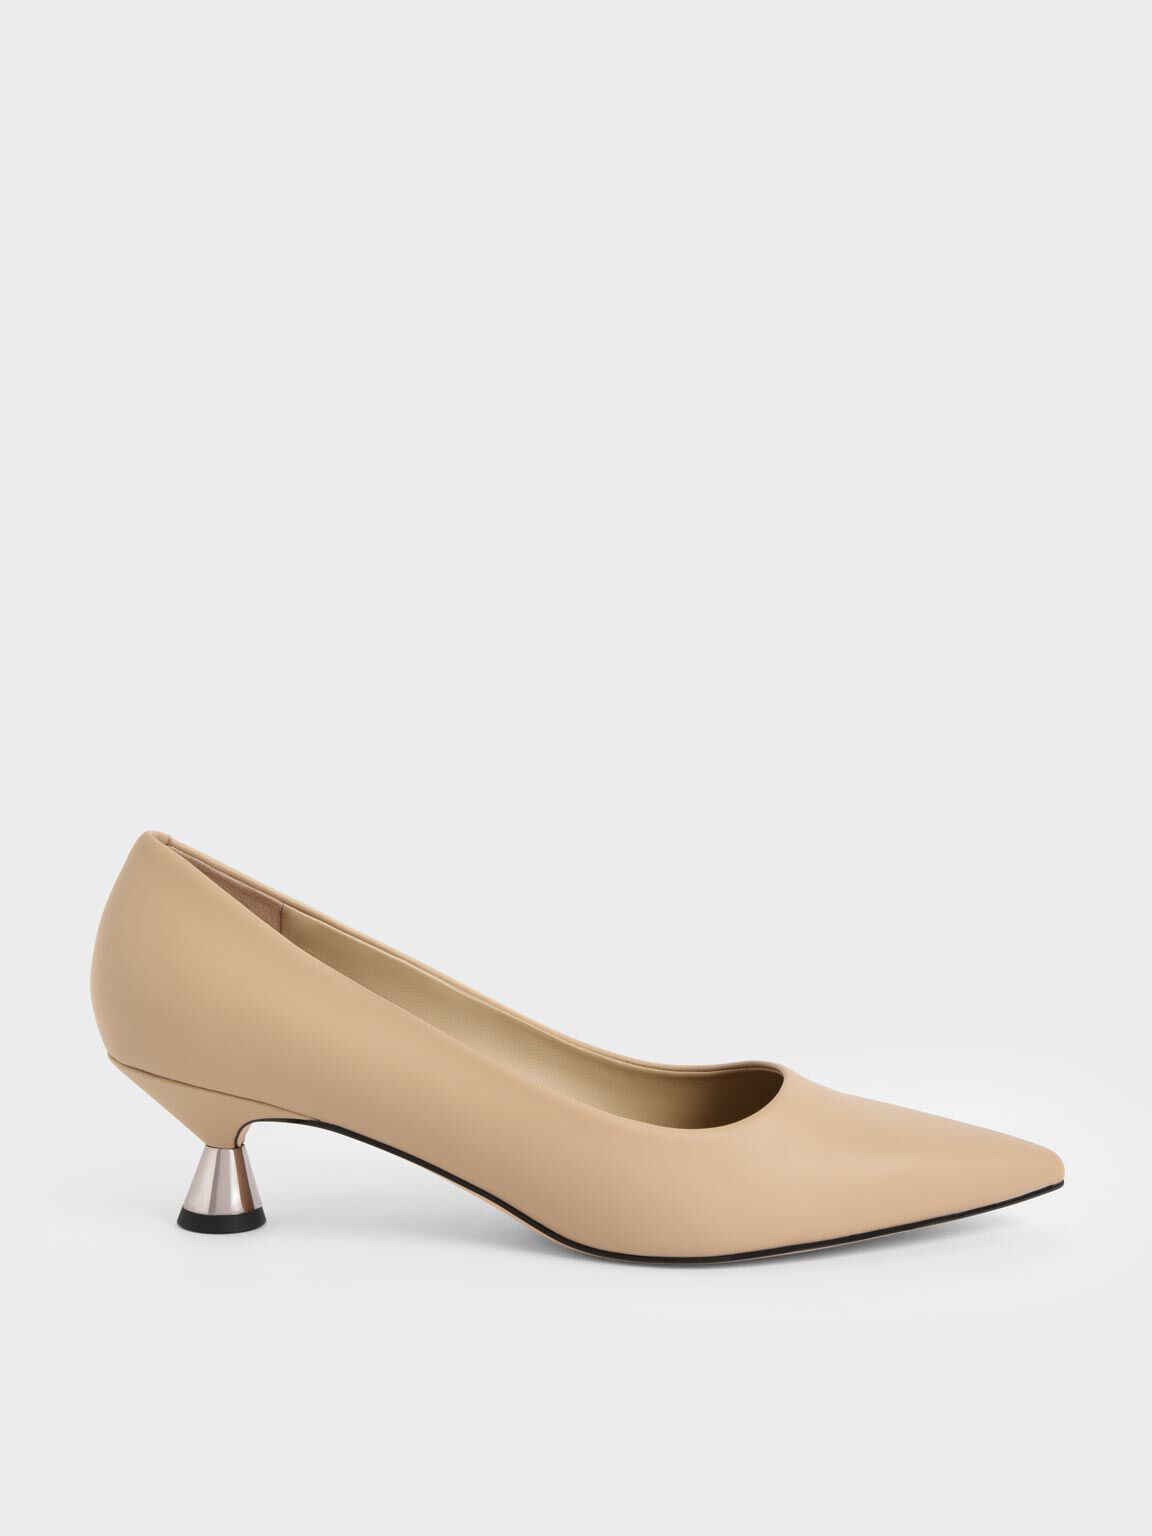 Shop Women's Shoes Online - Heels & More, CHARLES & KEITH